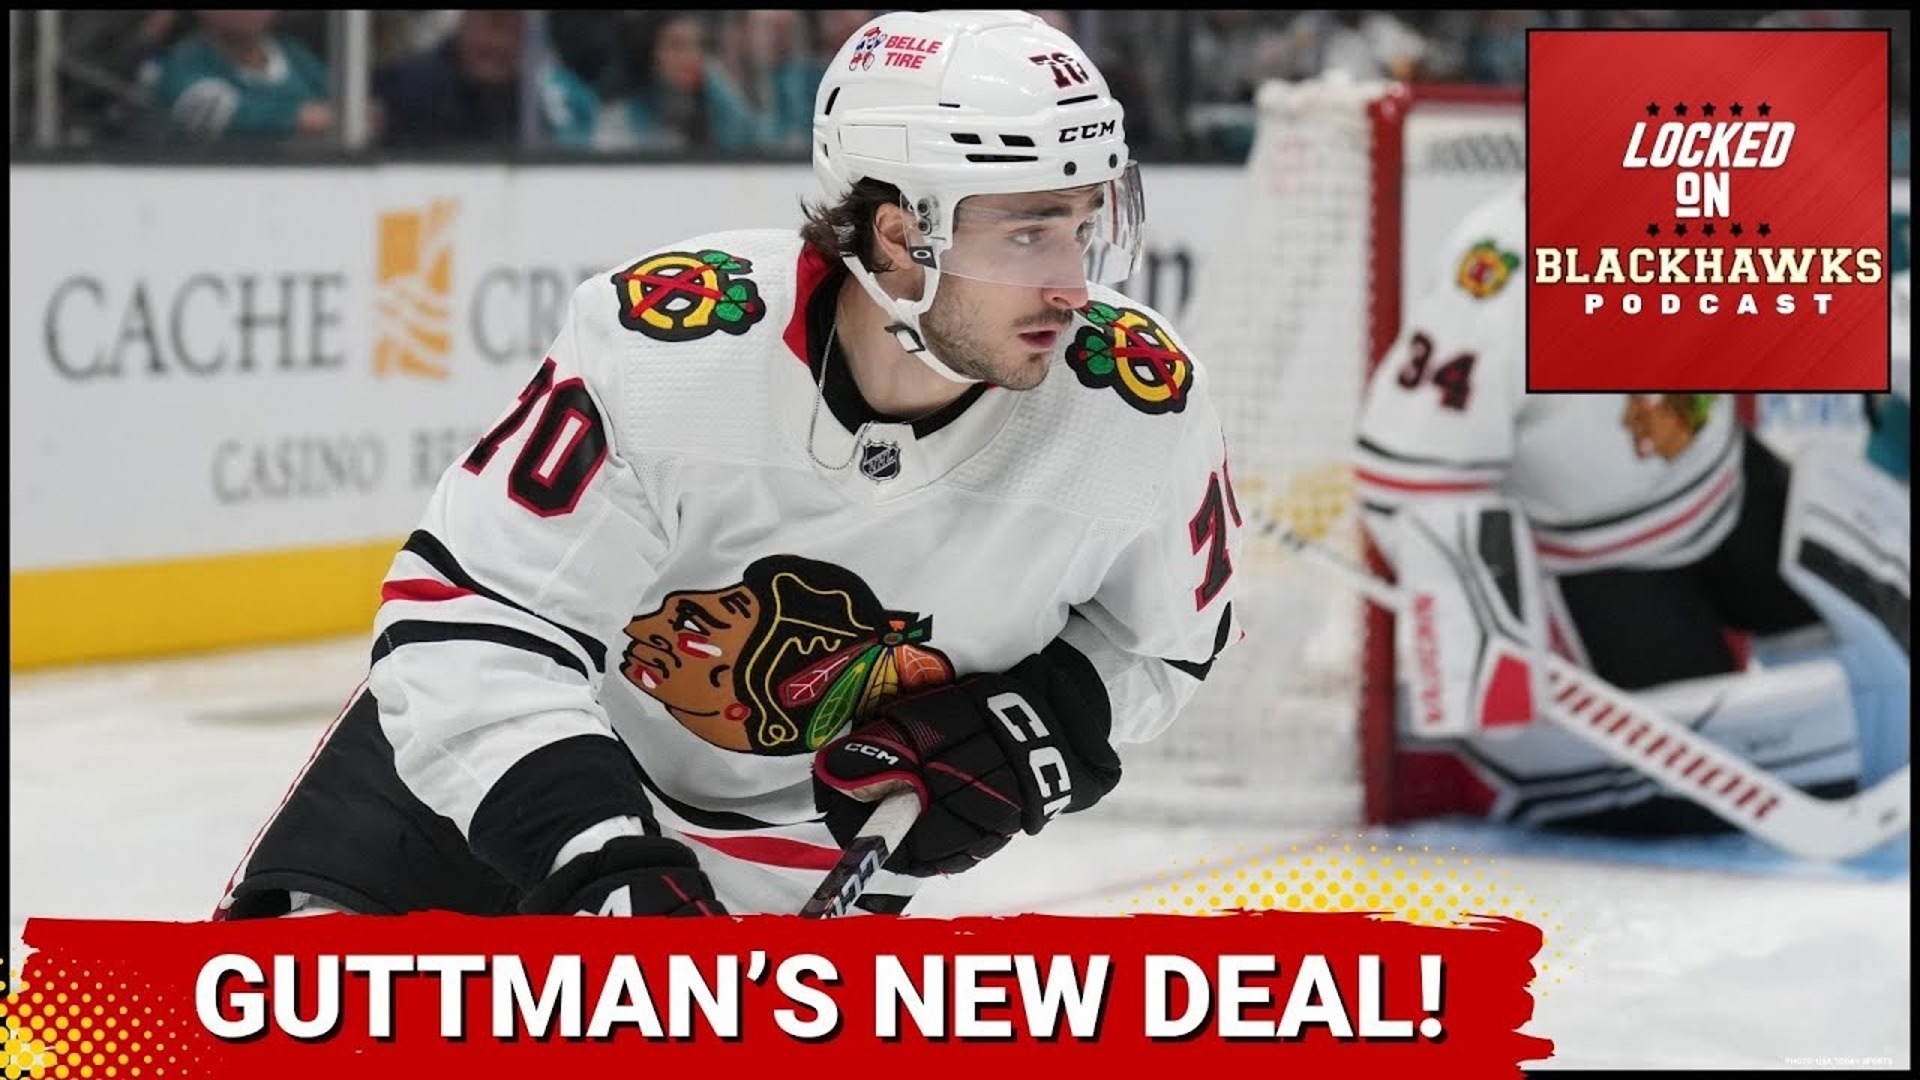 Friday's episode begins with some thoughts on forward Cole Guttman signing a one-year, two-way contract extension with the Chicago Blackhawks on Thursday morning!